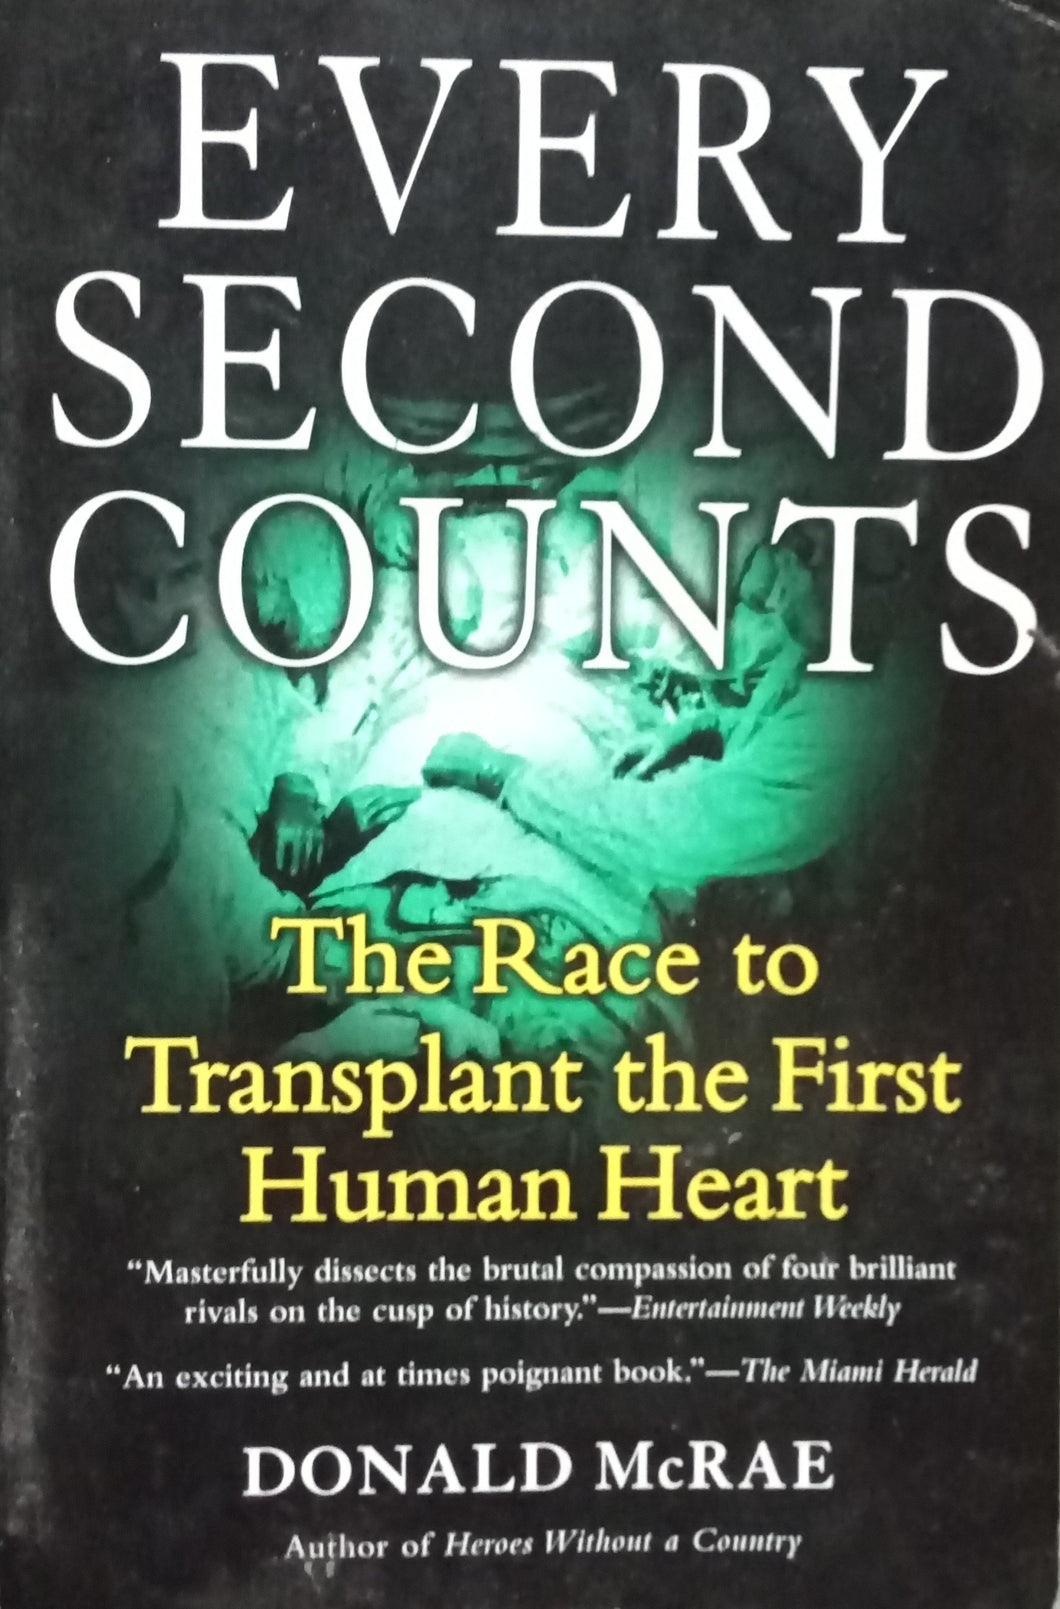 Every Second Counts by Donald McRae